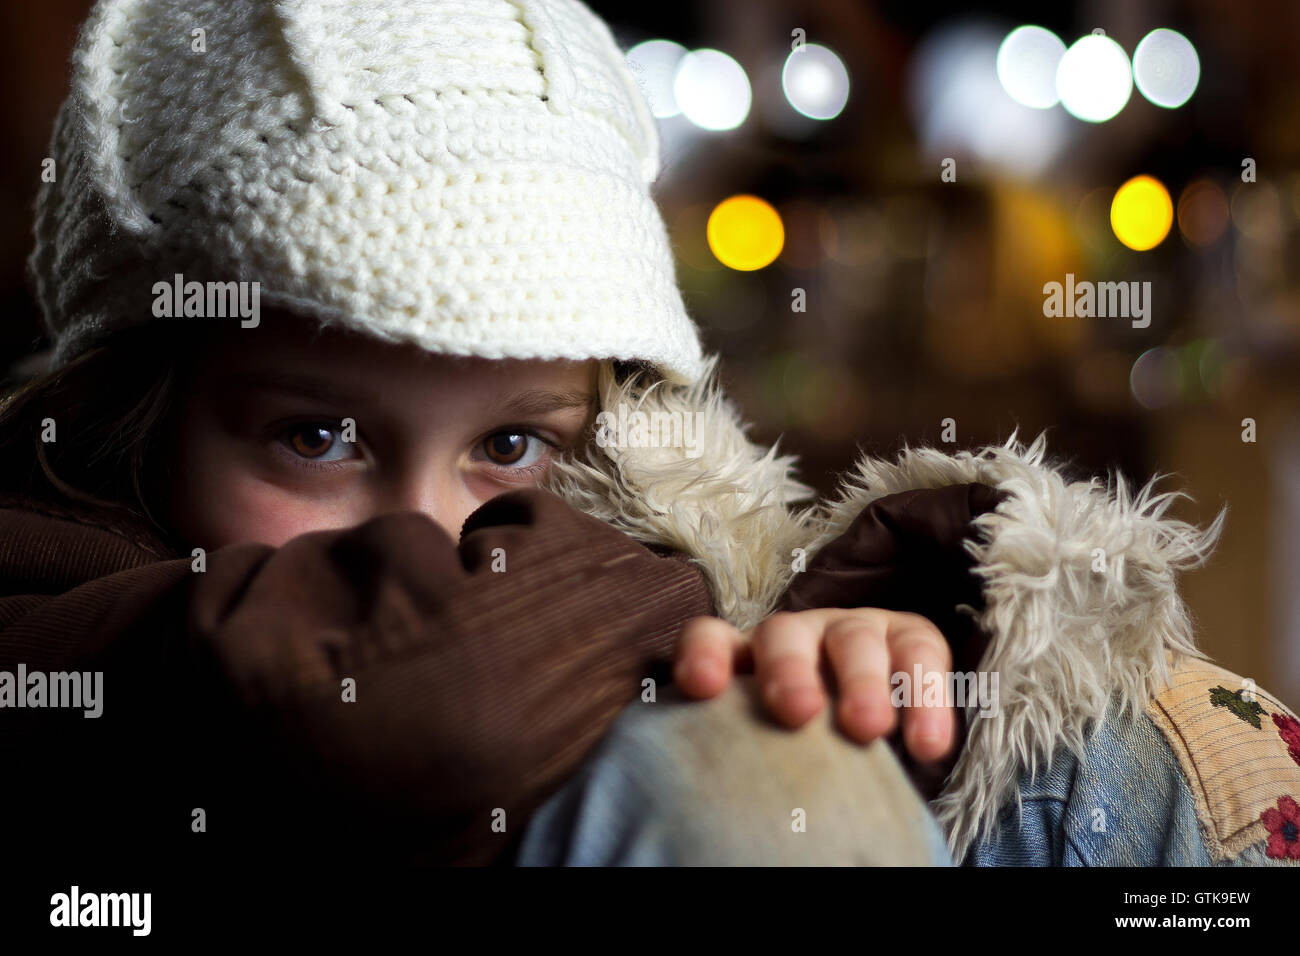 A shy young girl wearing a hat and coat sits in a crouched position looking at the camera. Stock Photo